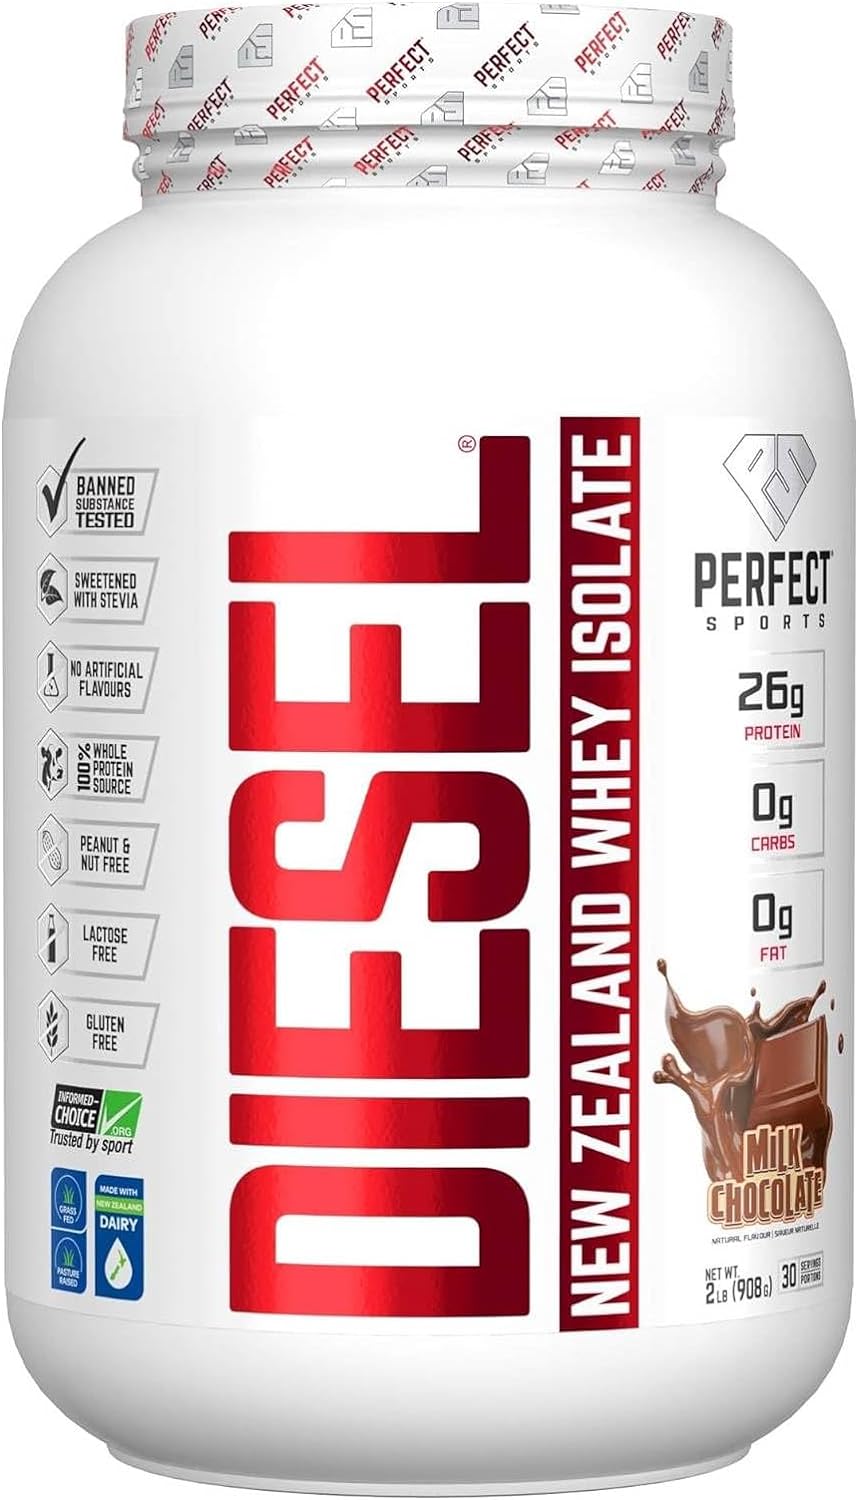 Perfect Sports DIESEL New Zealand Whey Protein Isolate Milk Chocolate / 2lb, SNS Health, Protein Powder